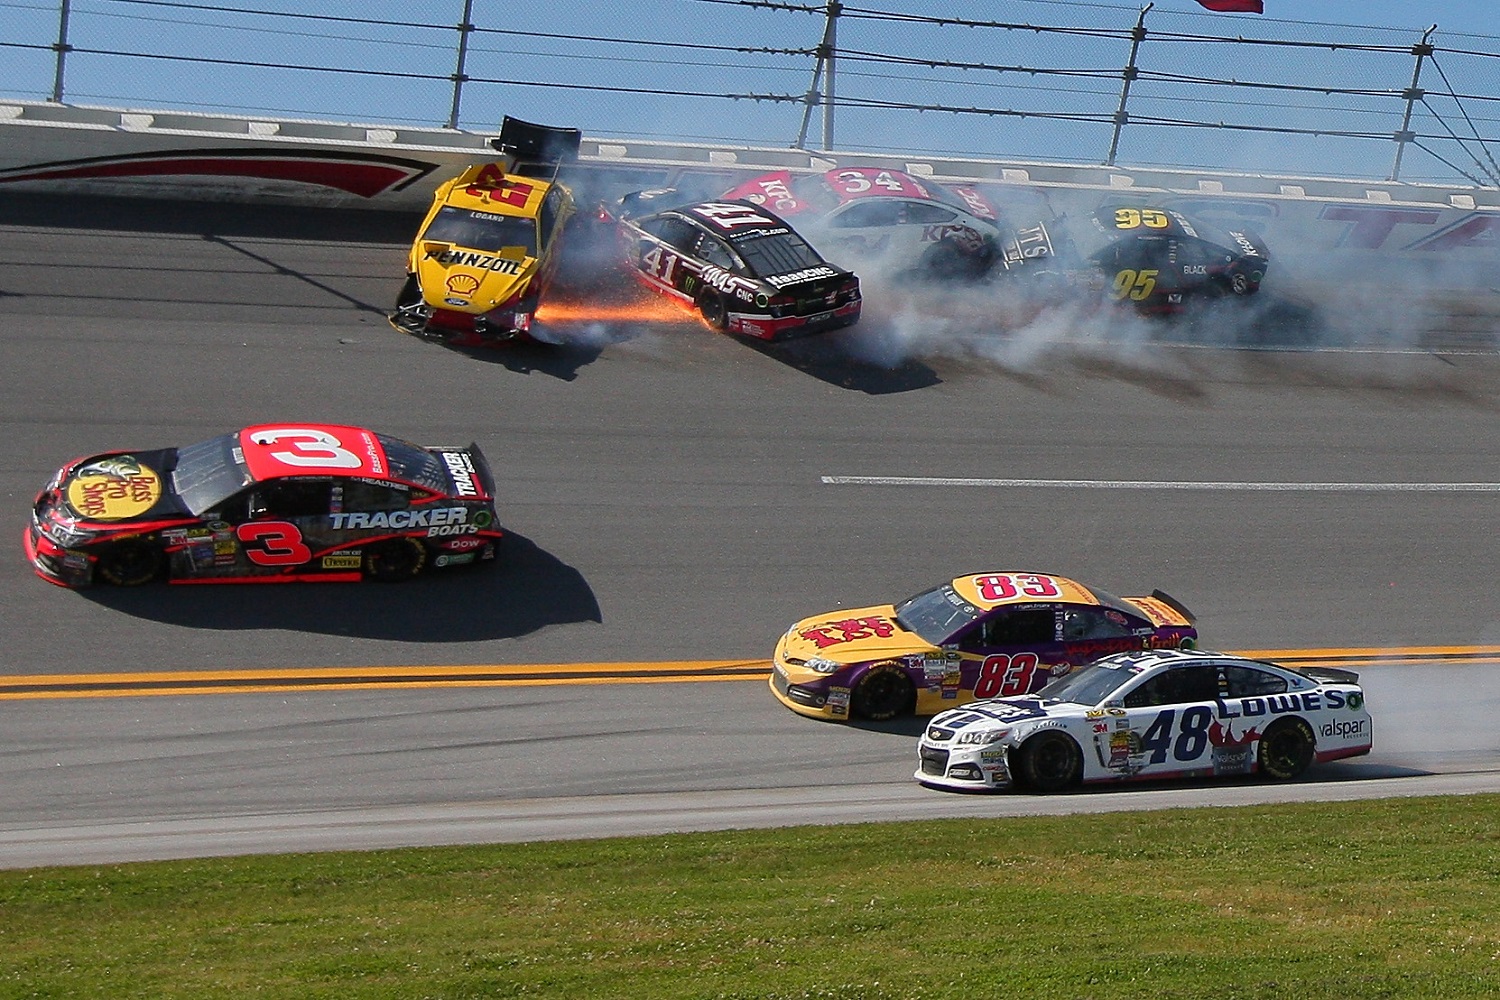 Joey Logano, driver of the No. 22 Ford; Kurt Busch, driver of the No. 41 Chevrolet; David Ragan, driver of the No. 34 Ford; and Michael McDowell, driver of the No. 95 Ford, crash during the NASCAR Sprint Cup Series Aaron's 499 at Talladega Superspeedway on May 4, 2014.